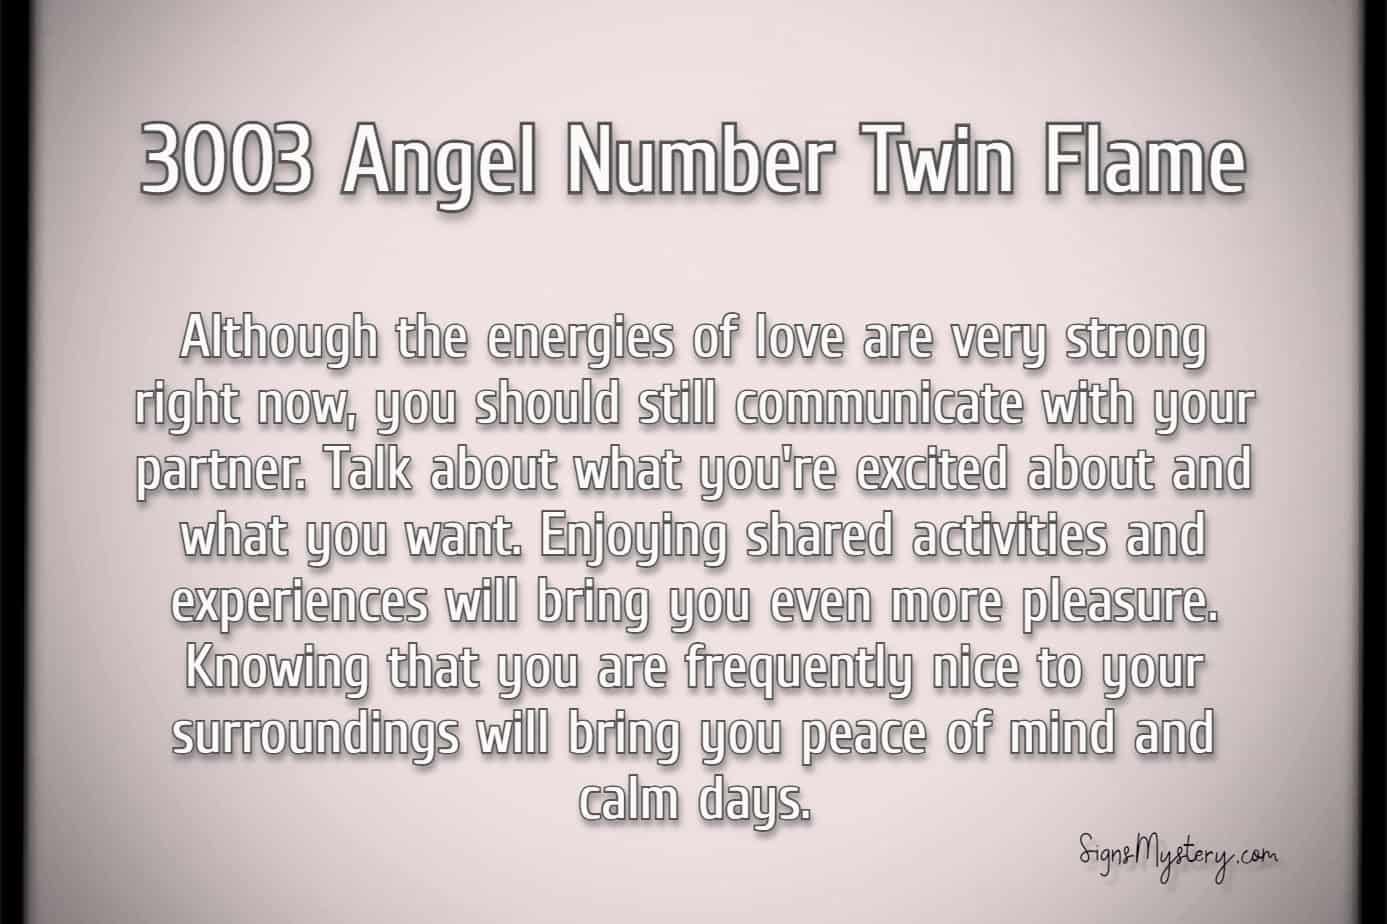 3003 angel number twin flame